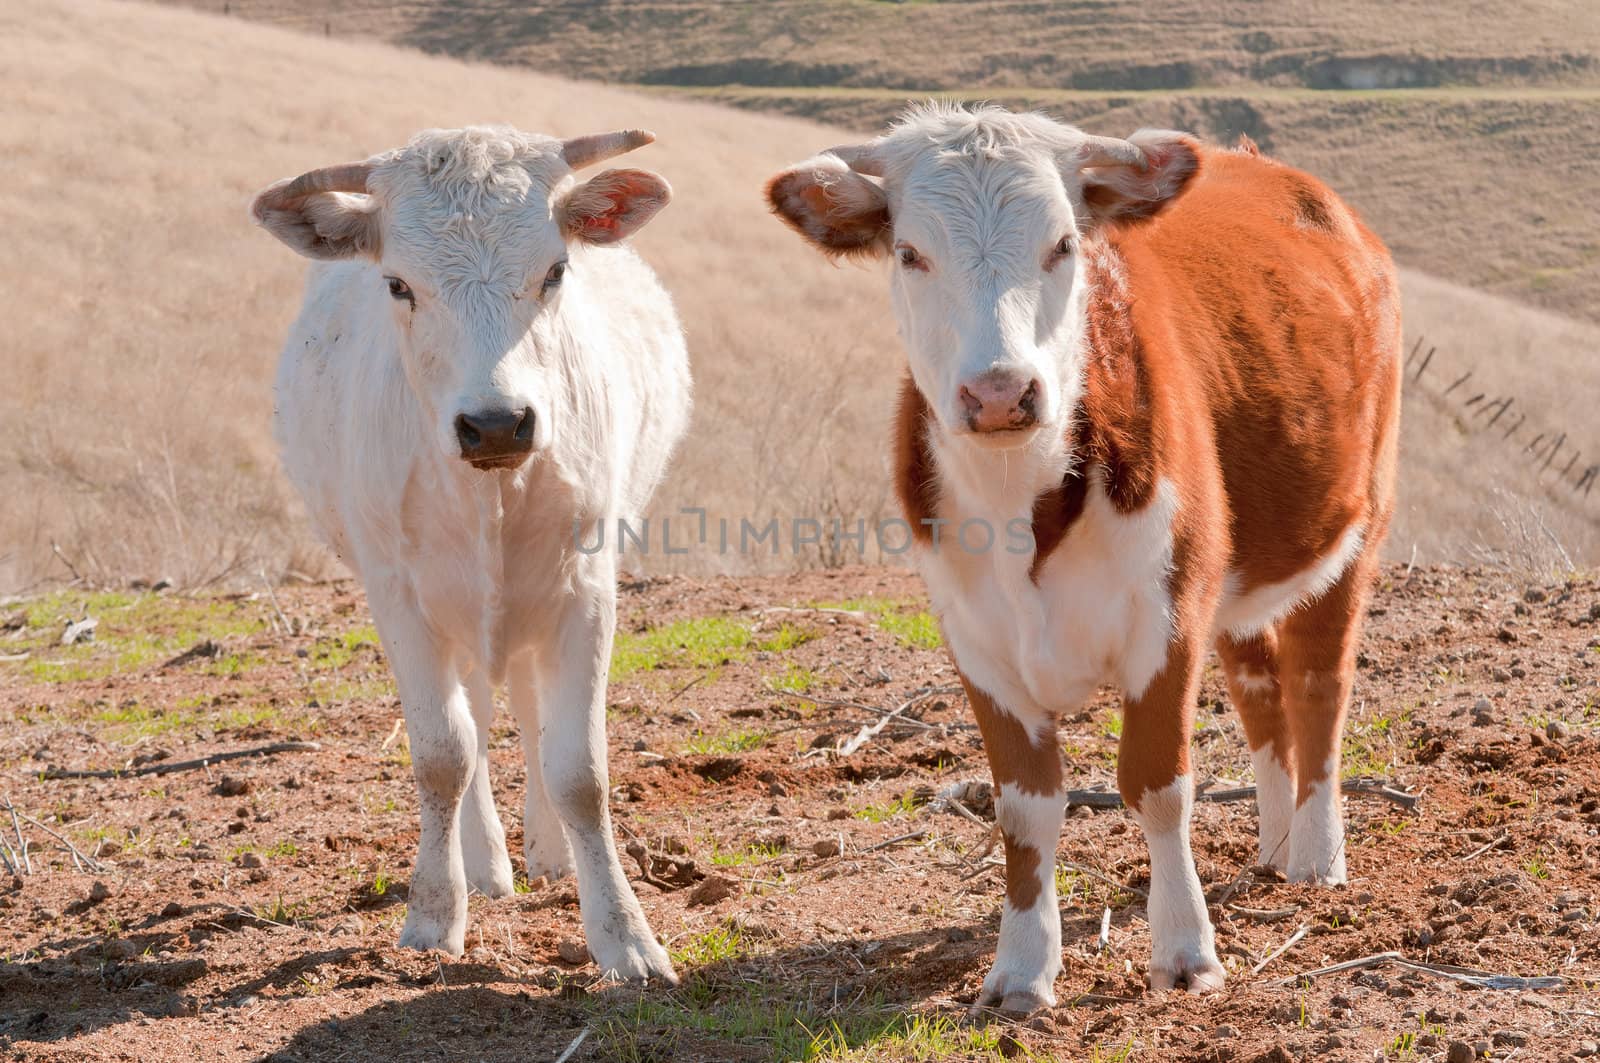 cattle on a ranch in California